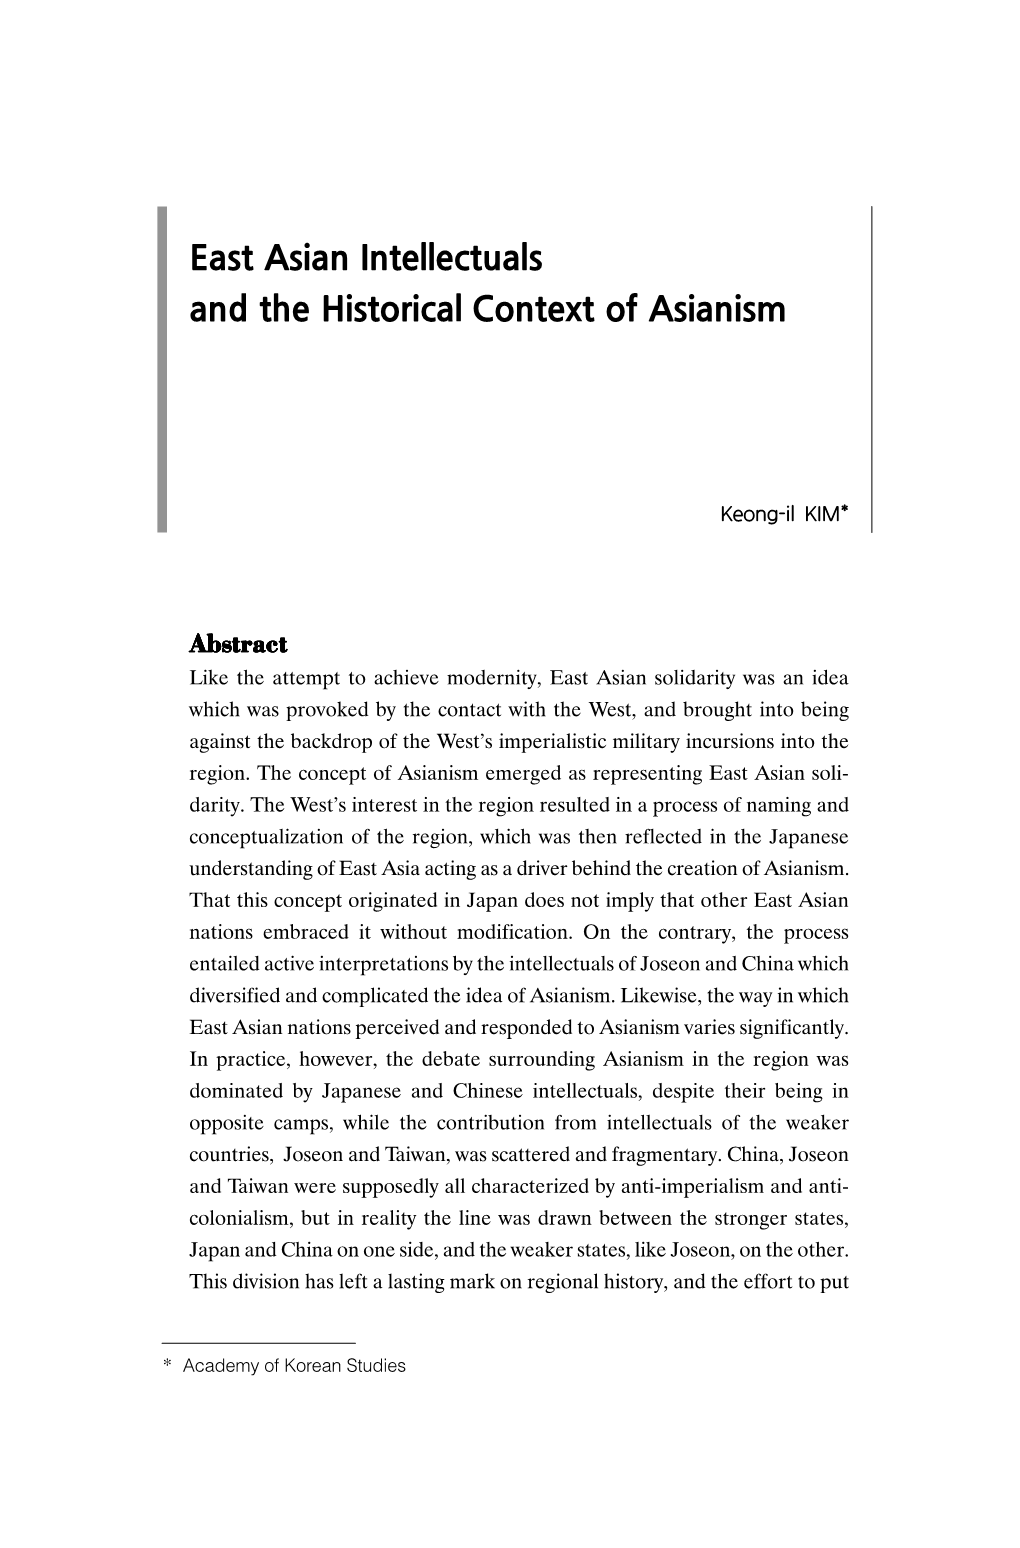 Keong-Il KIM : East Asian Intellectuals and the Historical Context of Asianism